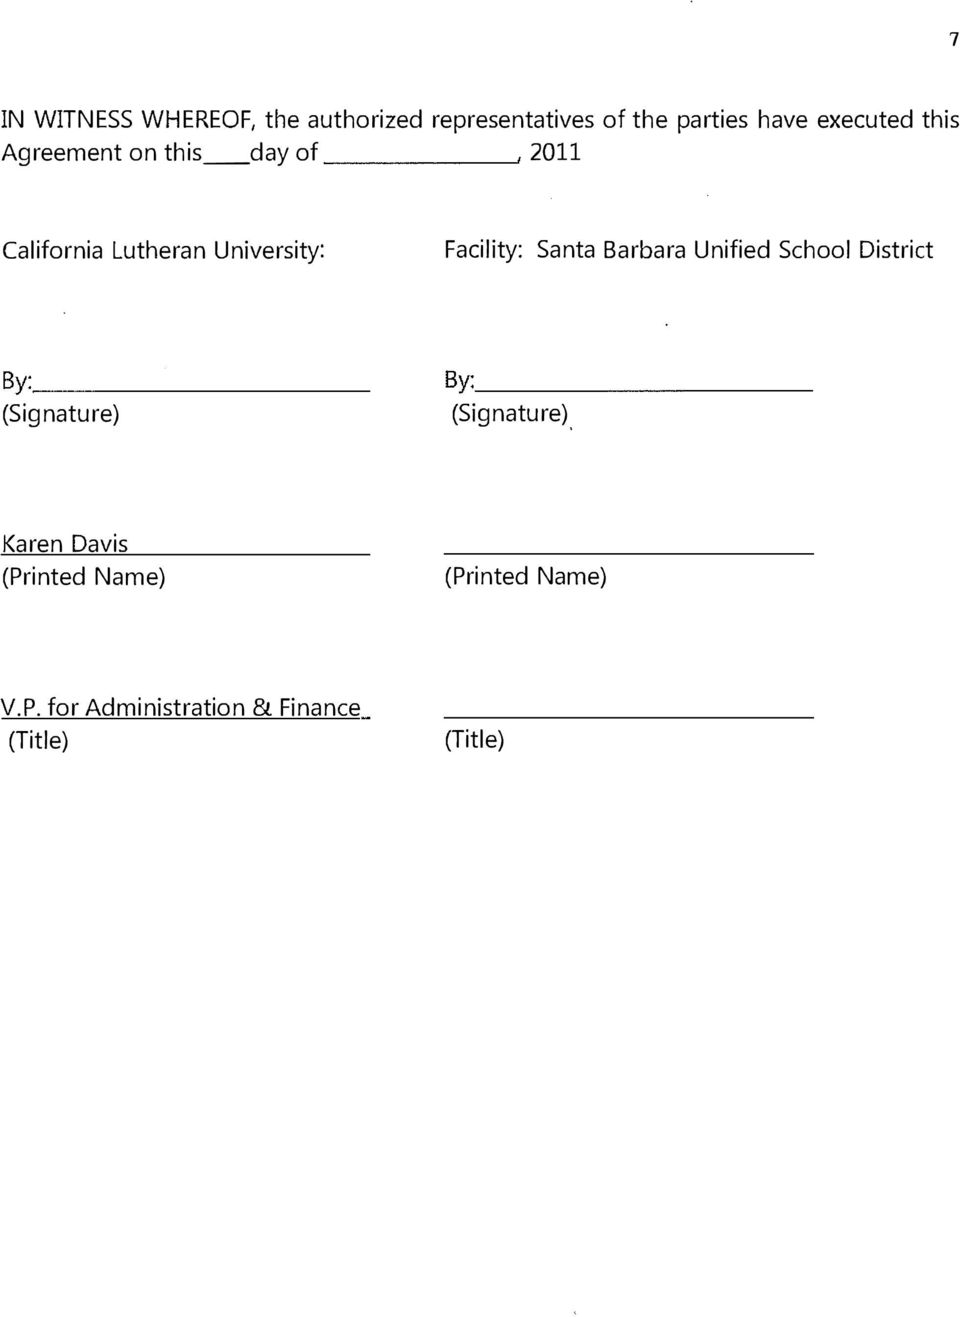 Facility: Santa Barbara Unified School District By: (Signature) By: (Signature)